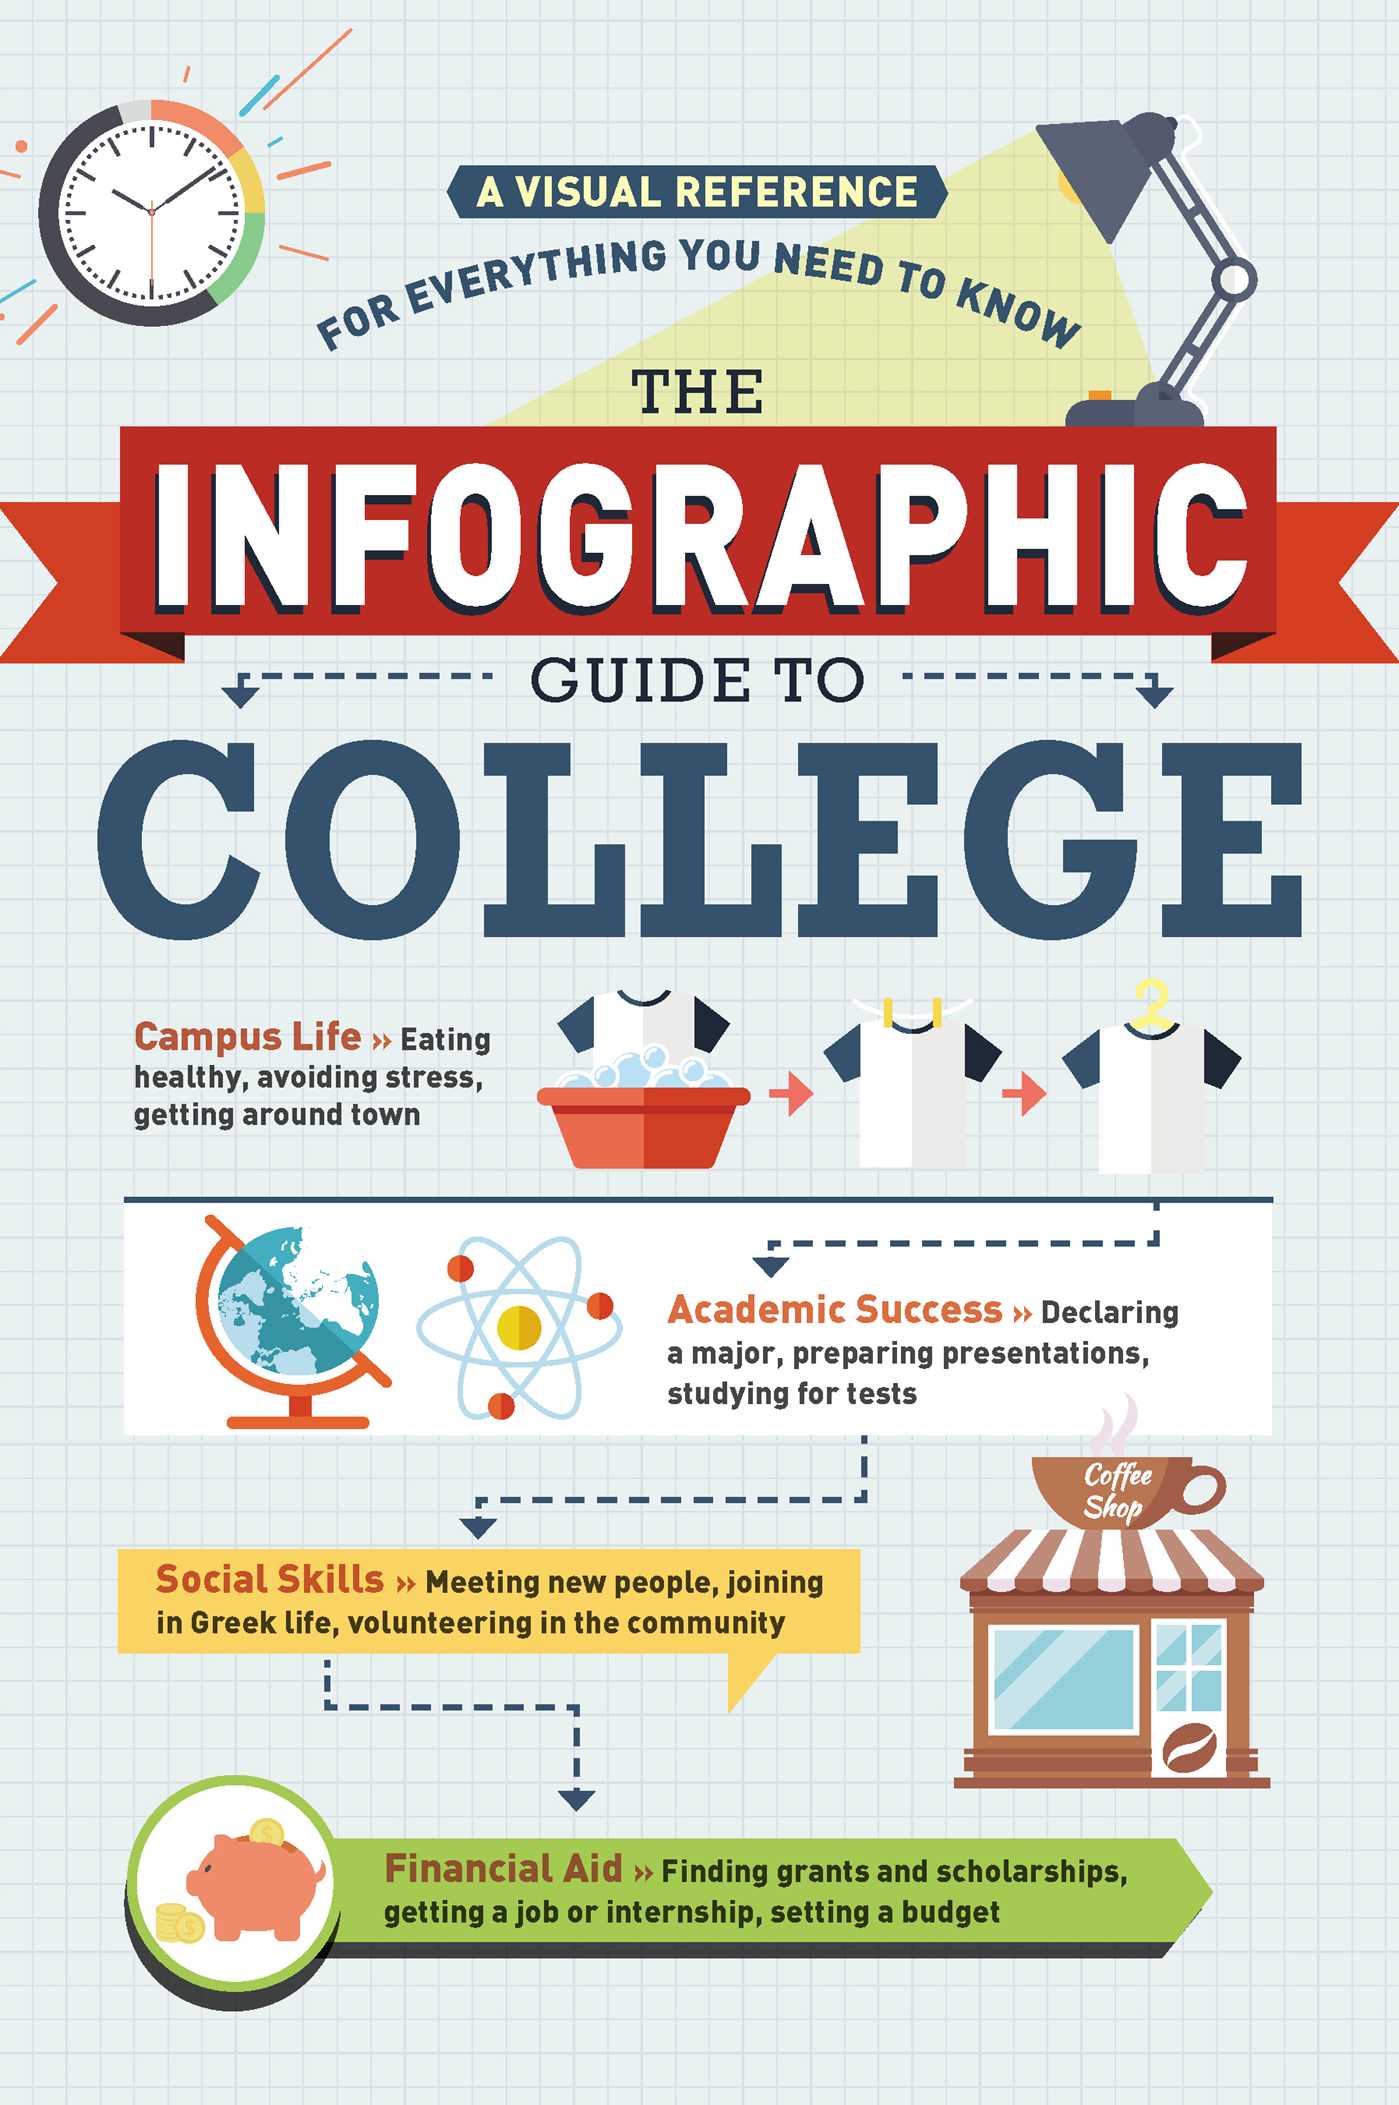 The College Collage: Annual Cost of Education [INFOGRAPHIC]  Infographic List